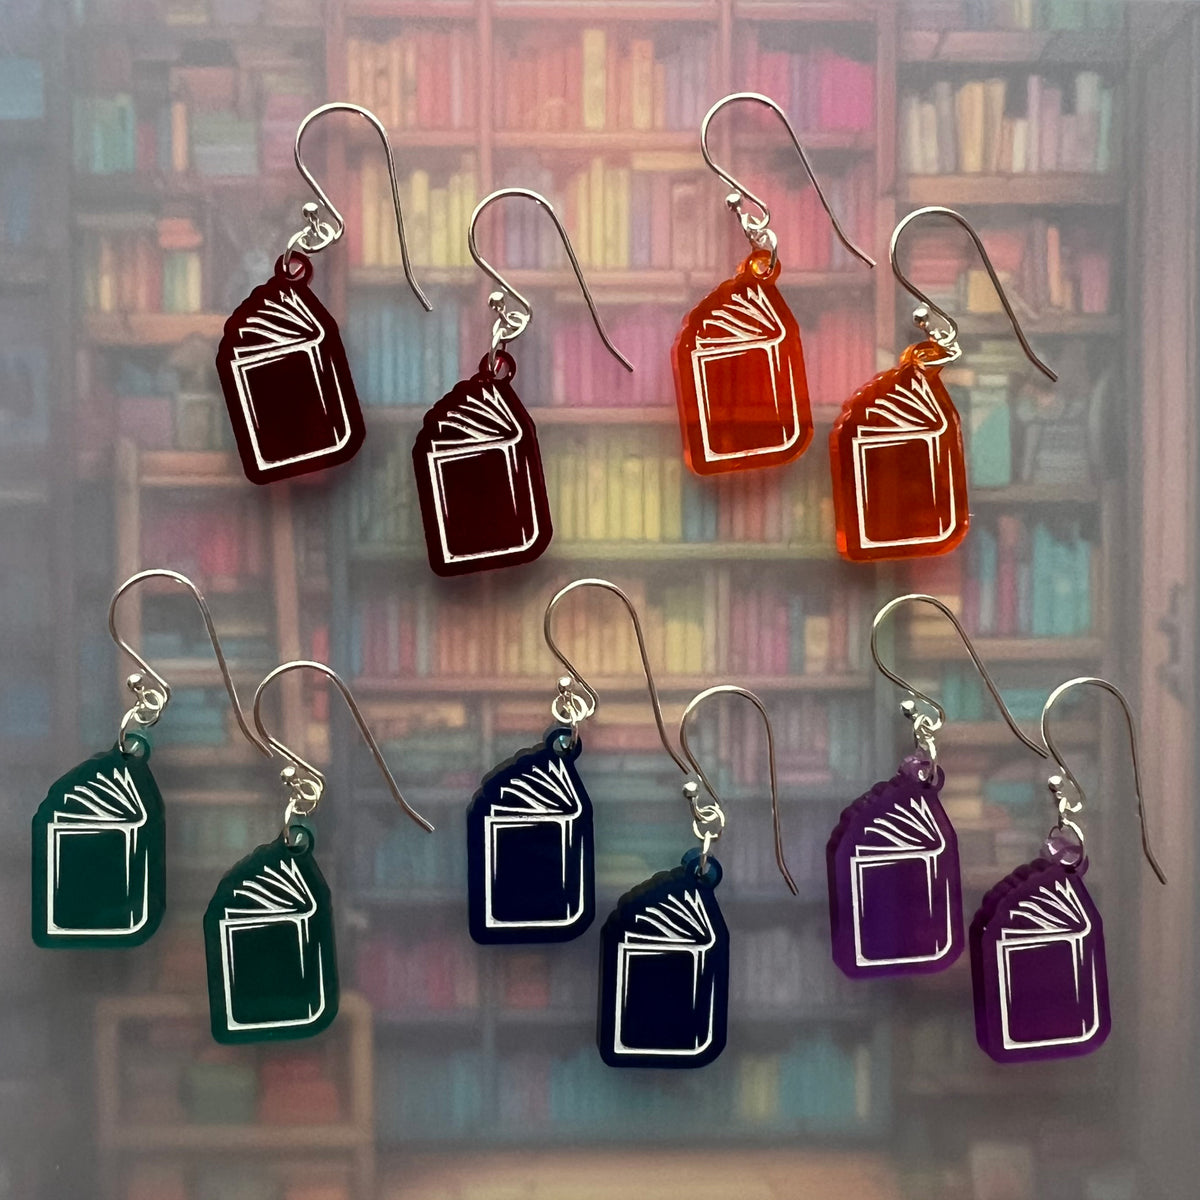 Simple Book Earrings for all book nerds